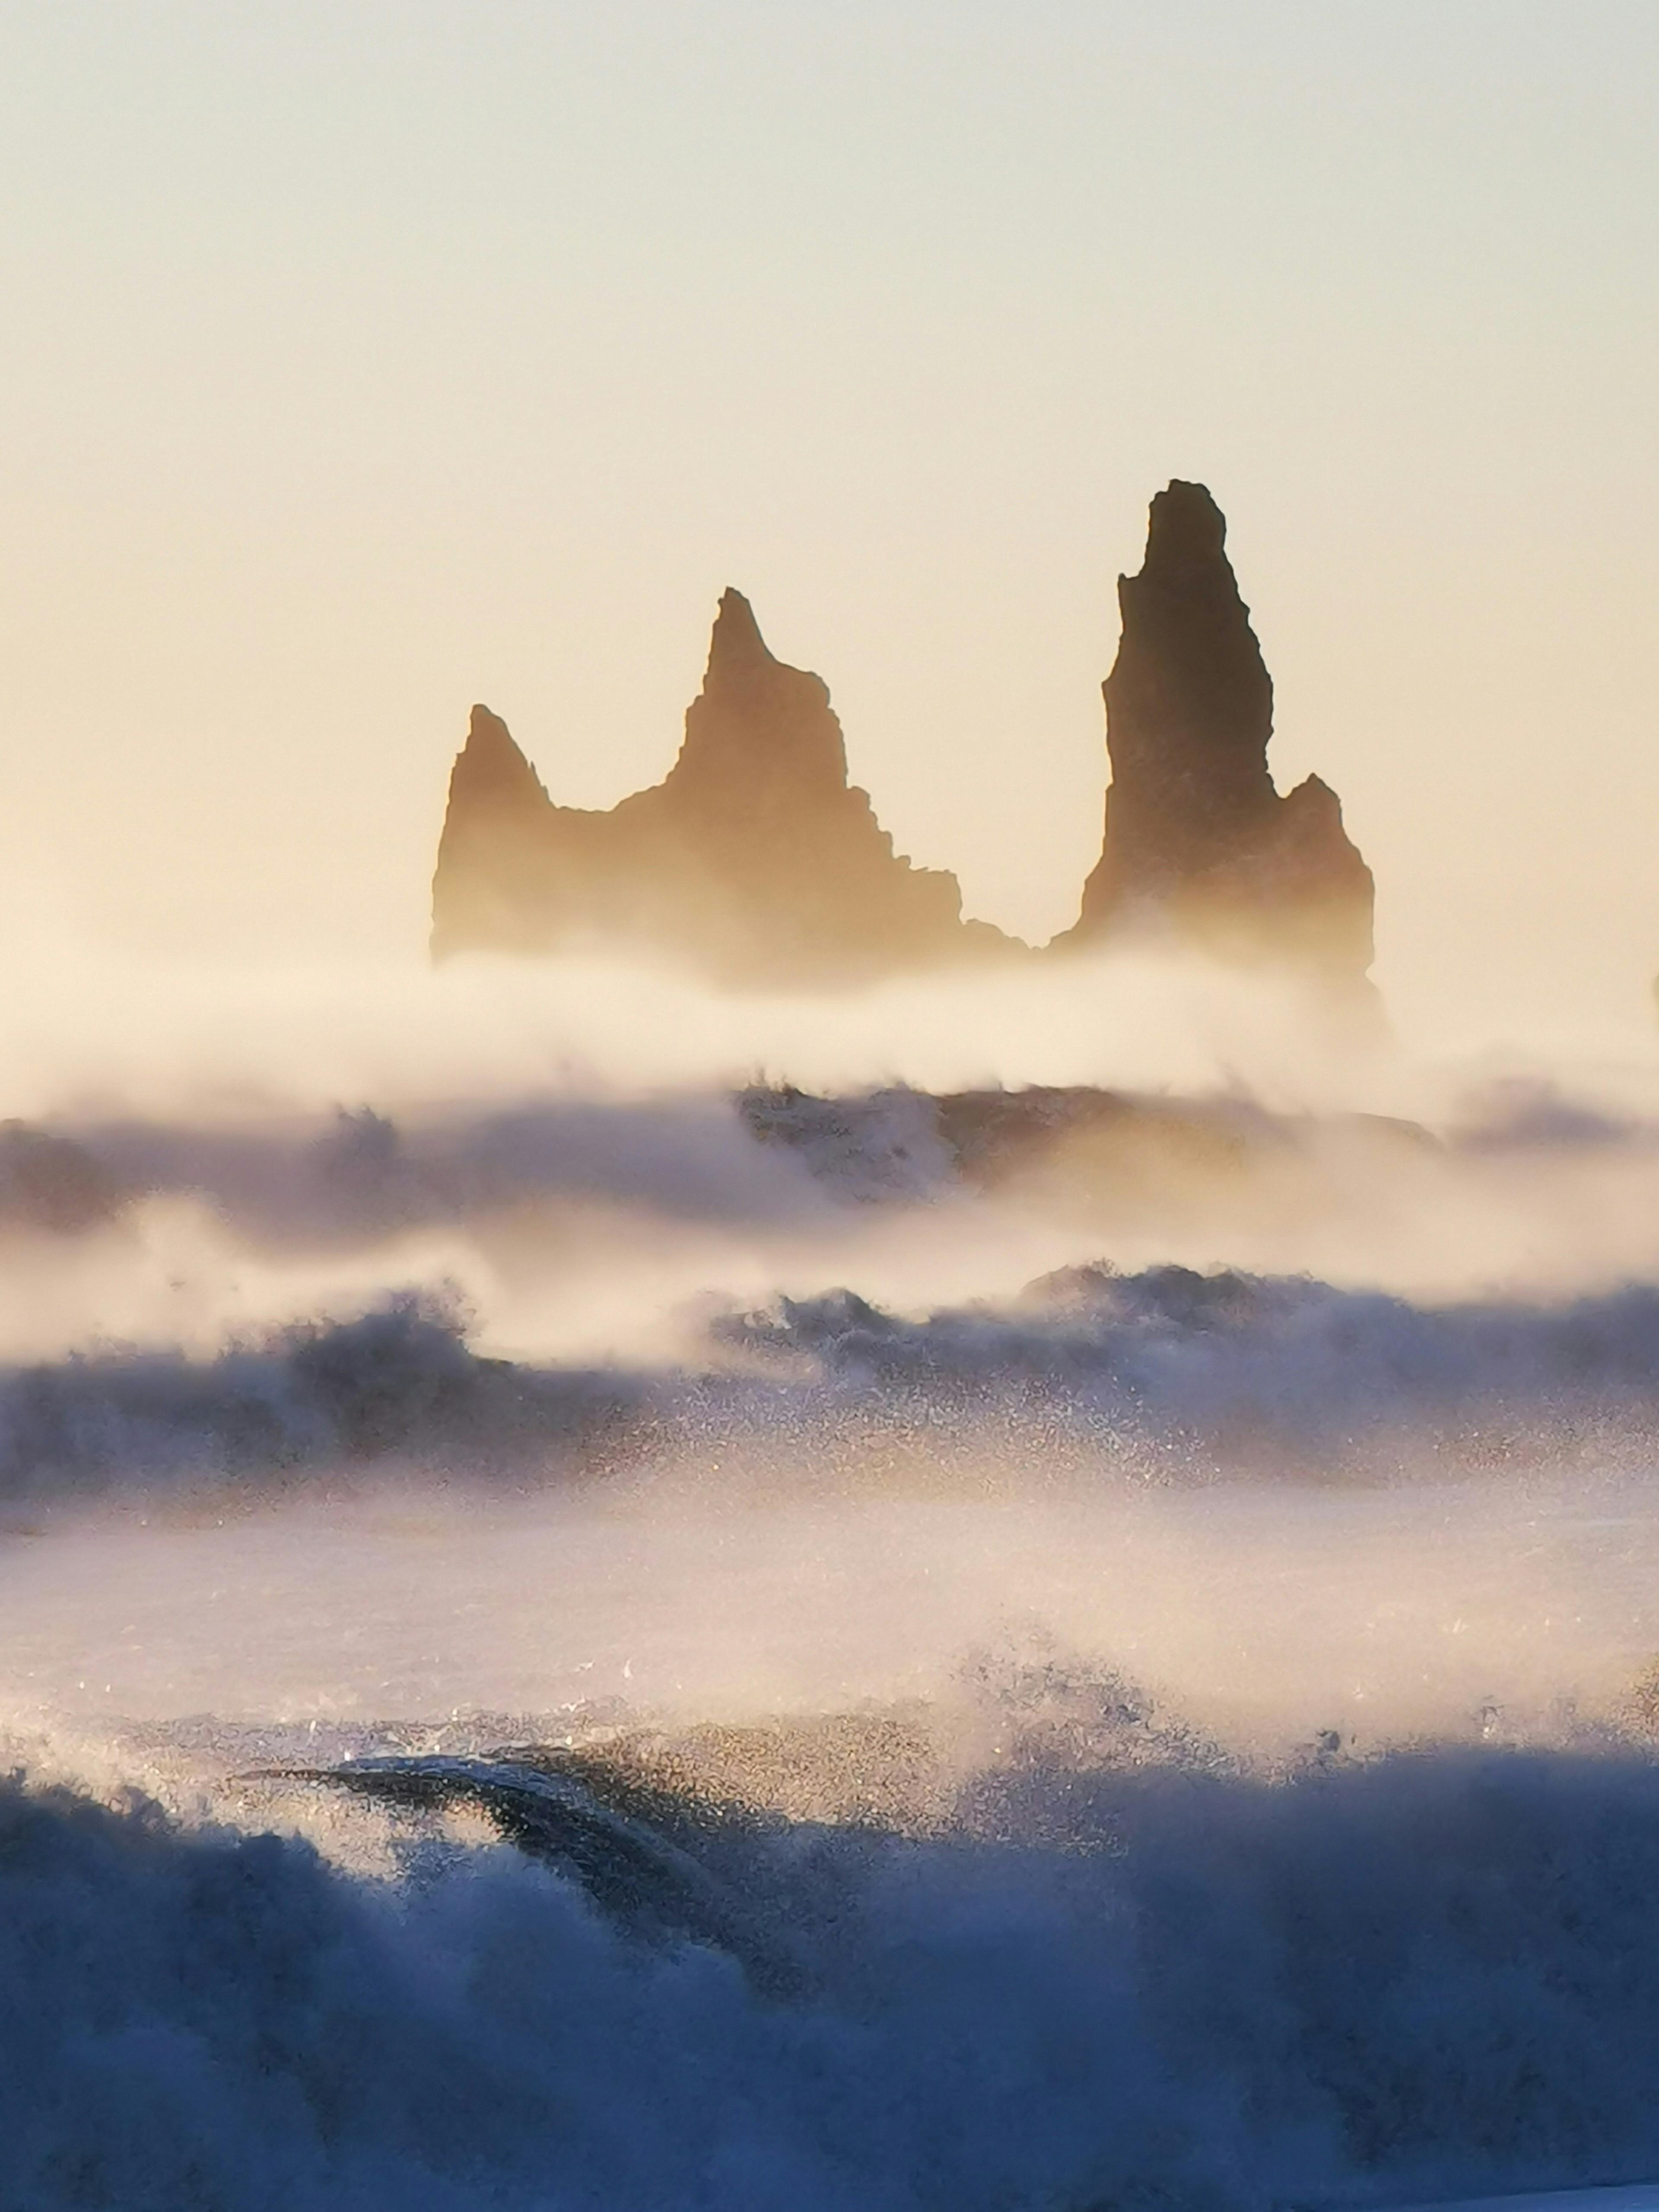 Silhouettes of jagged rock spires rising above a misty sea at dawn or dusk, with waves crashing around them.